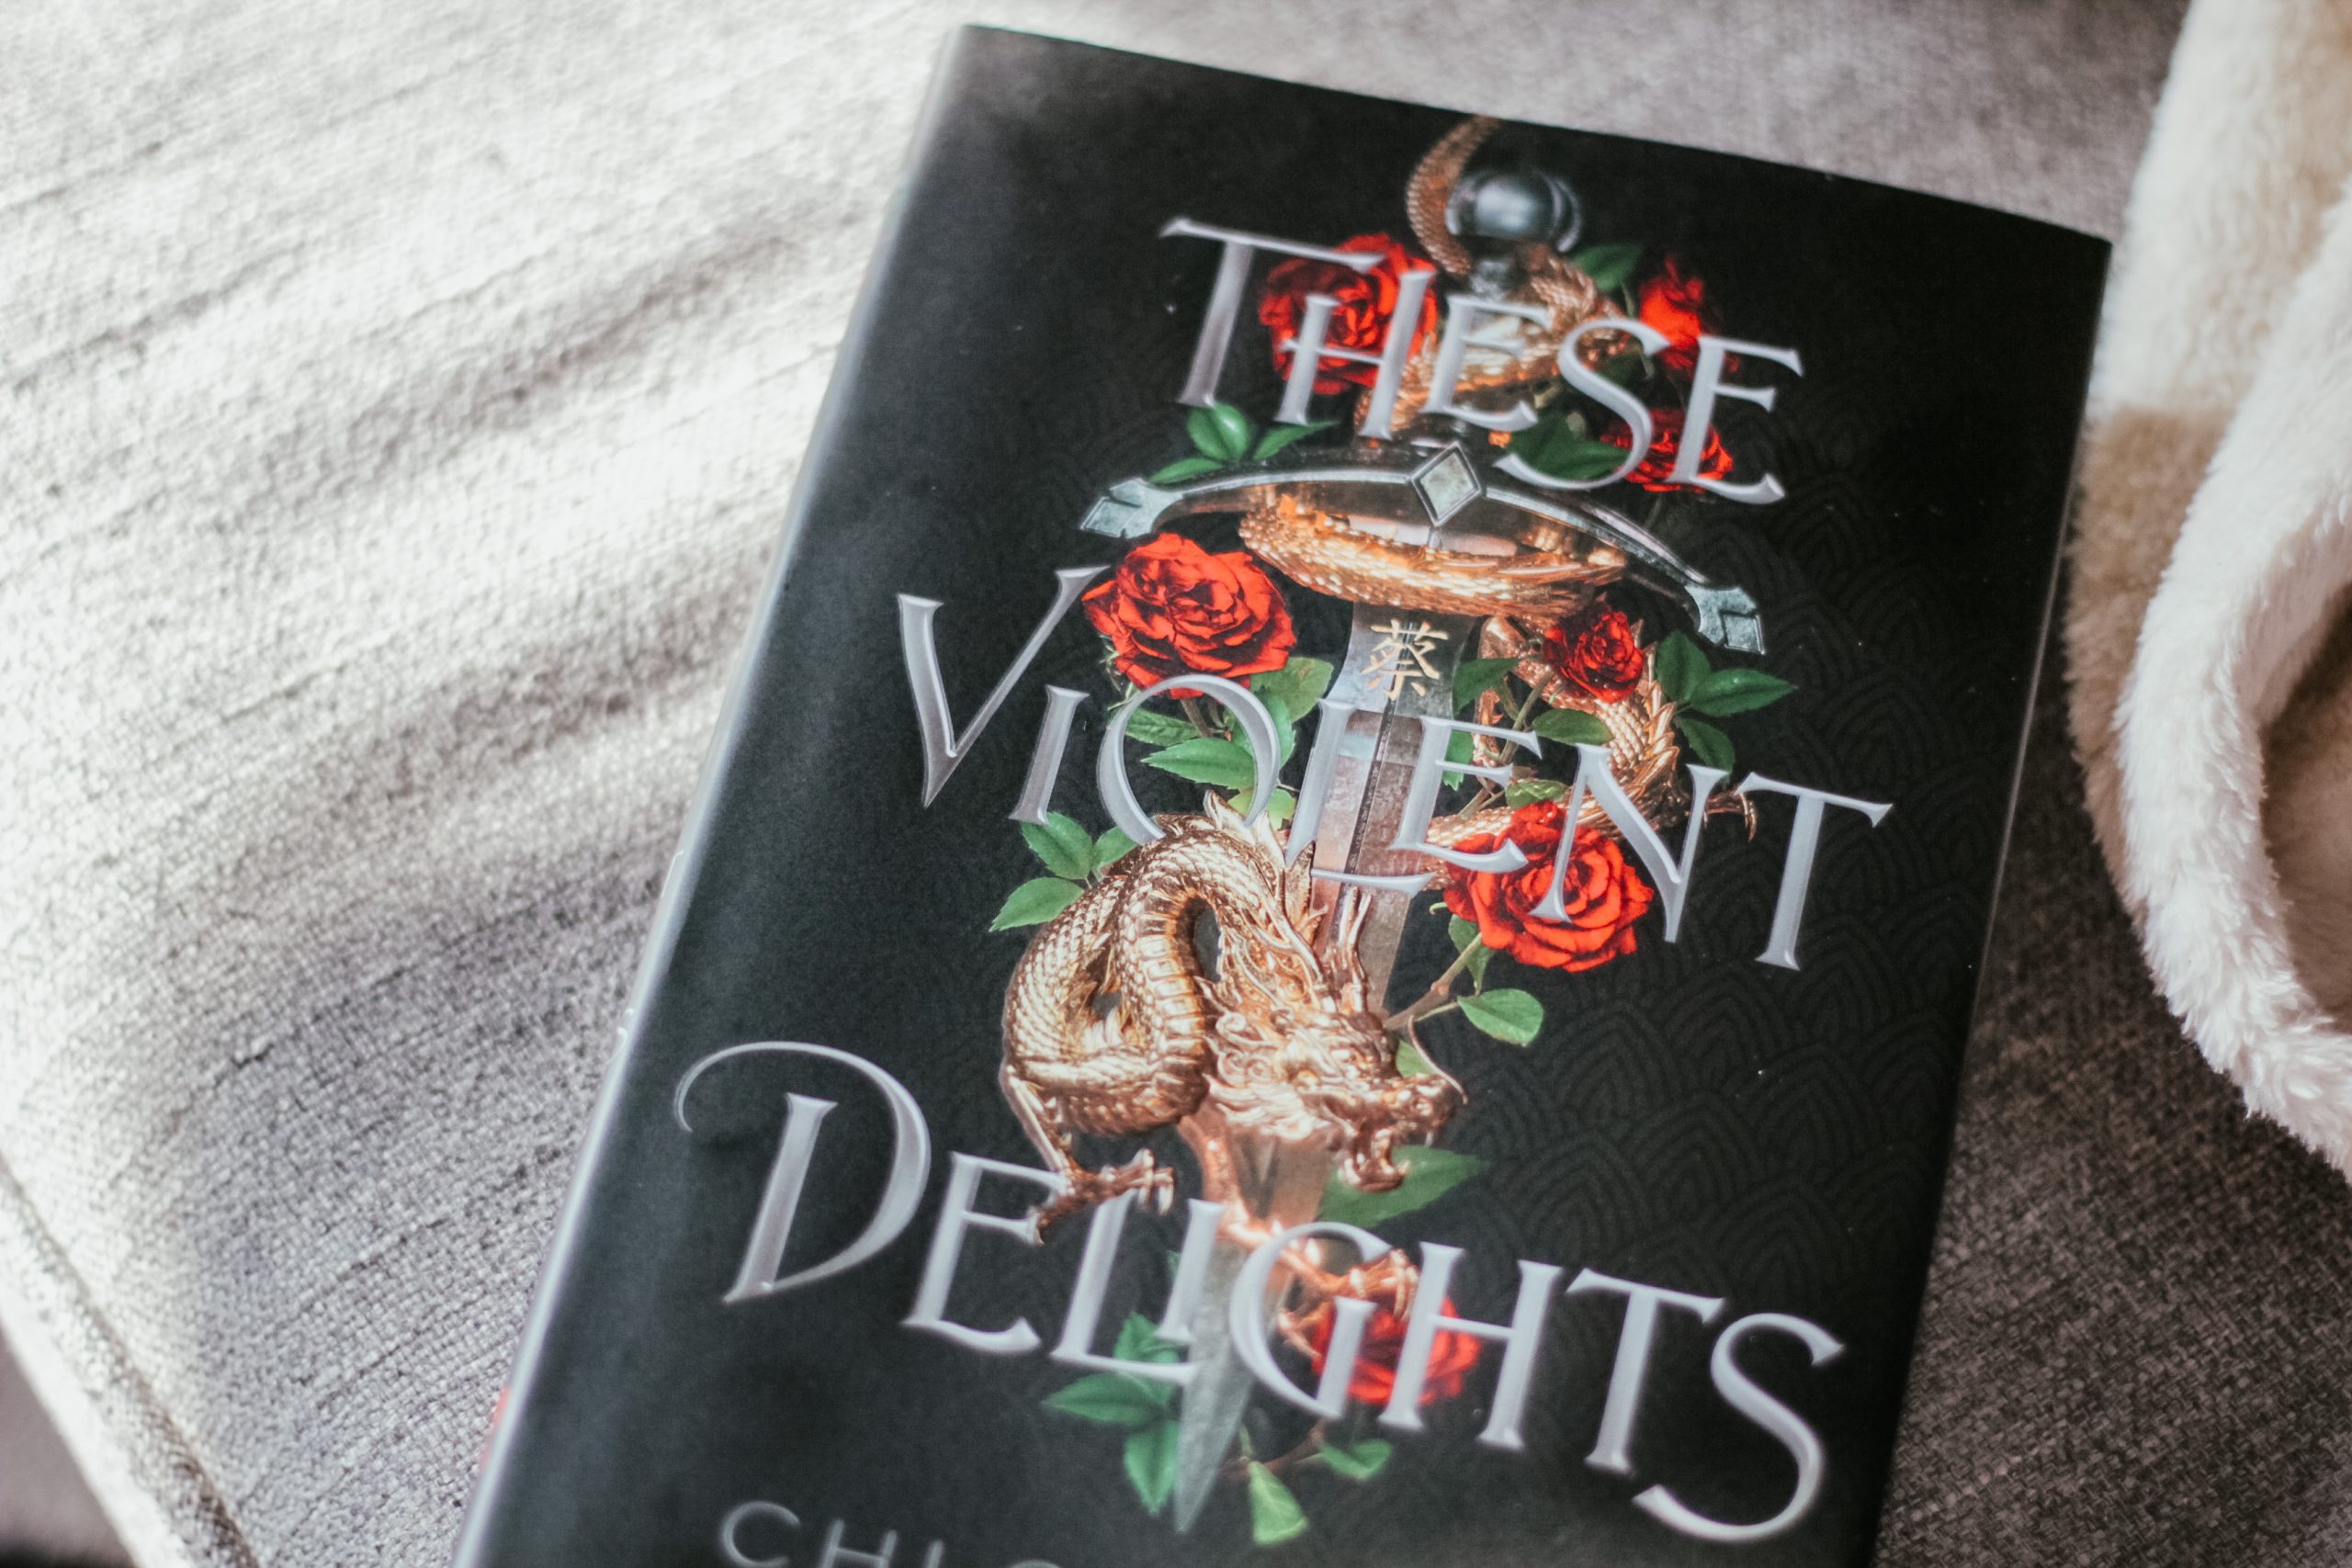 An image of the novel These Violent Delights